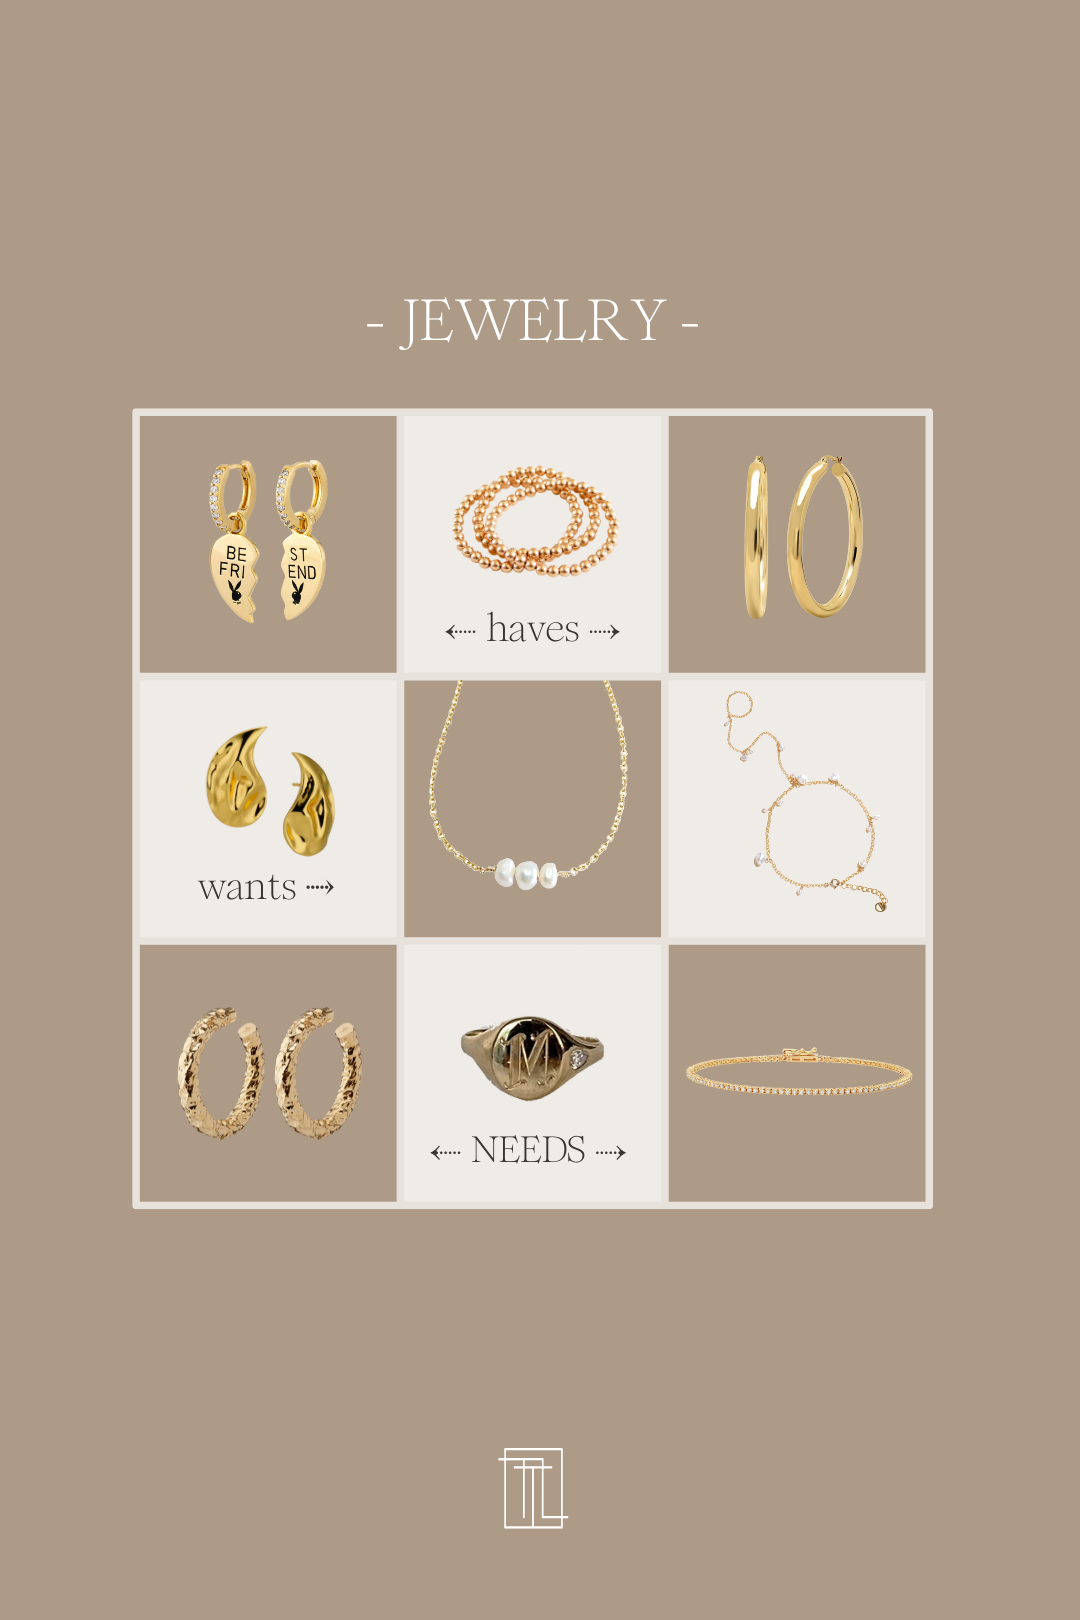 Jewelry - What I want, Need and Have